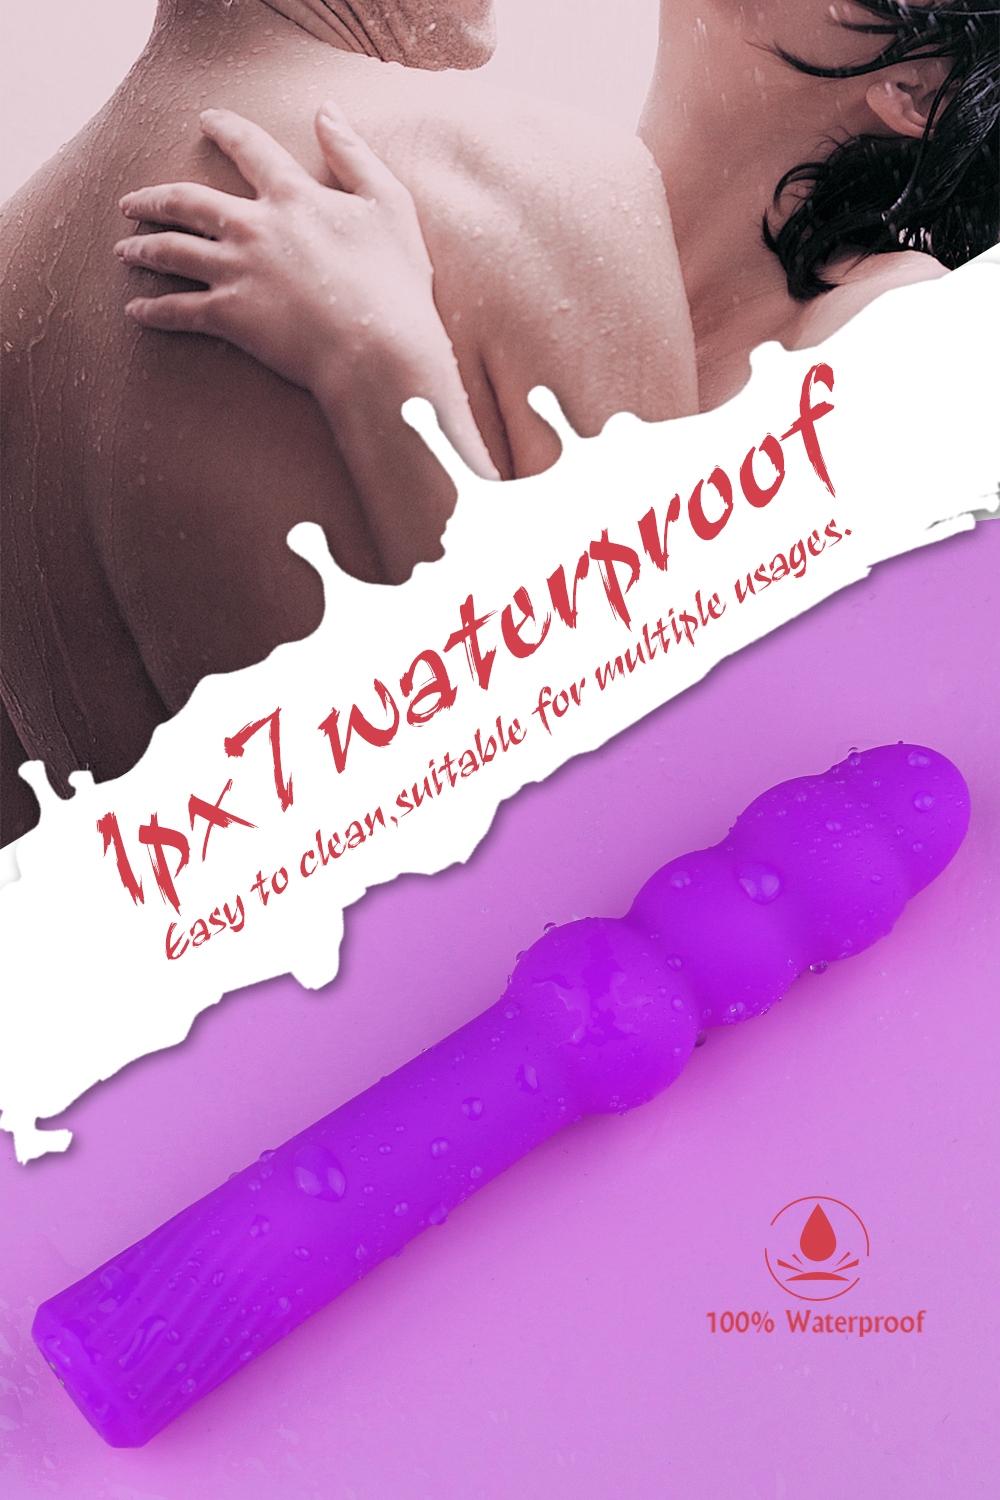 Silicone pussy womens wireless vibrator dildo pussy massager g spot vibrator violet sex toys for woman【S346】